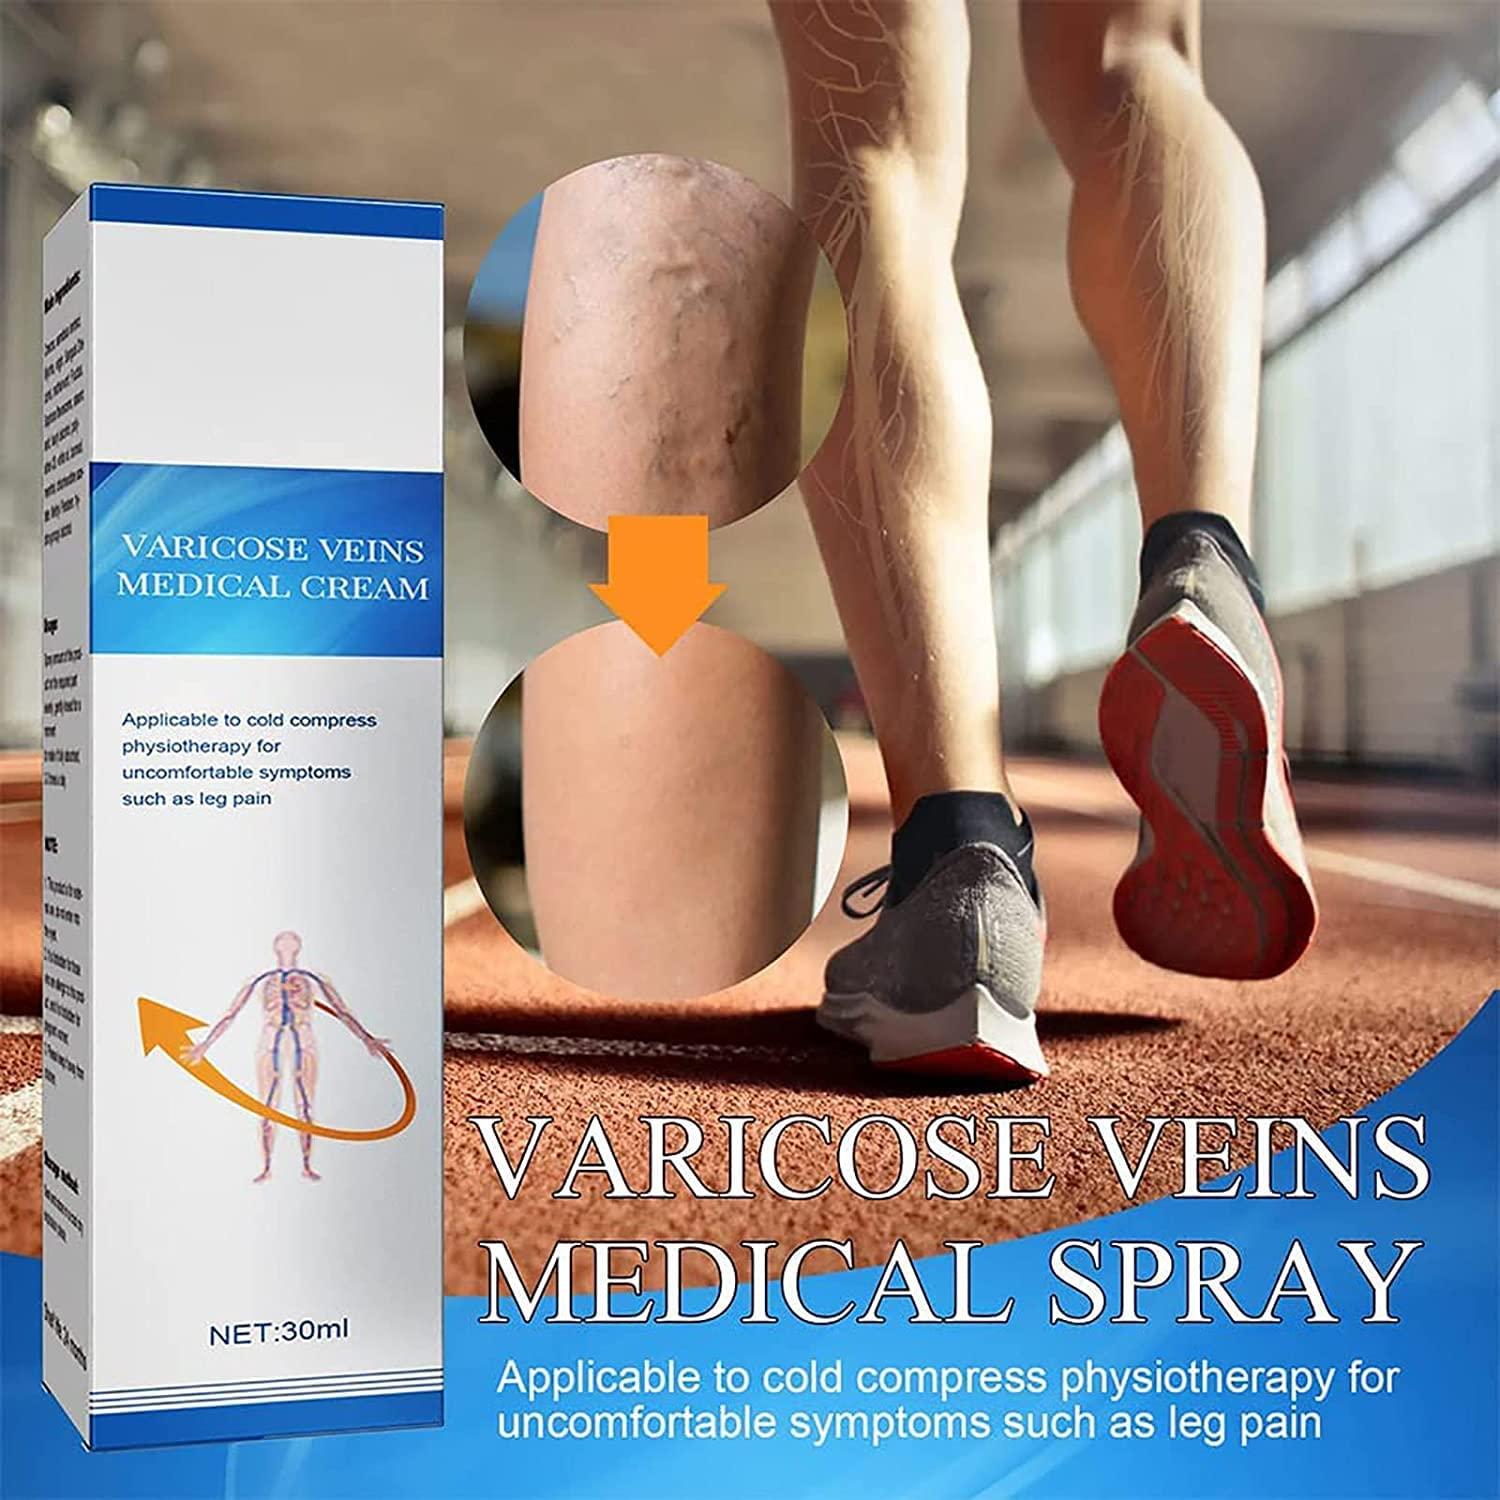 Products from medi for treating veins